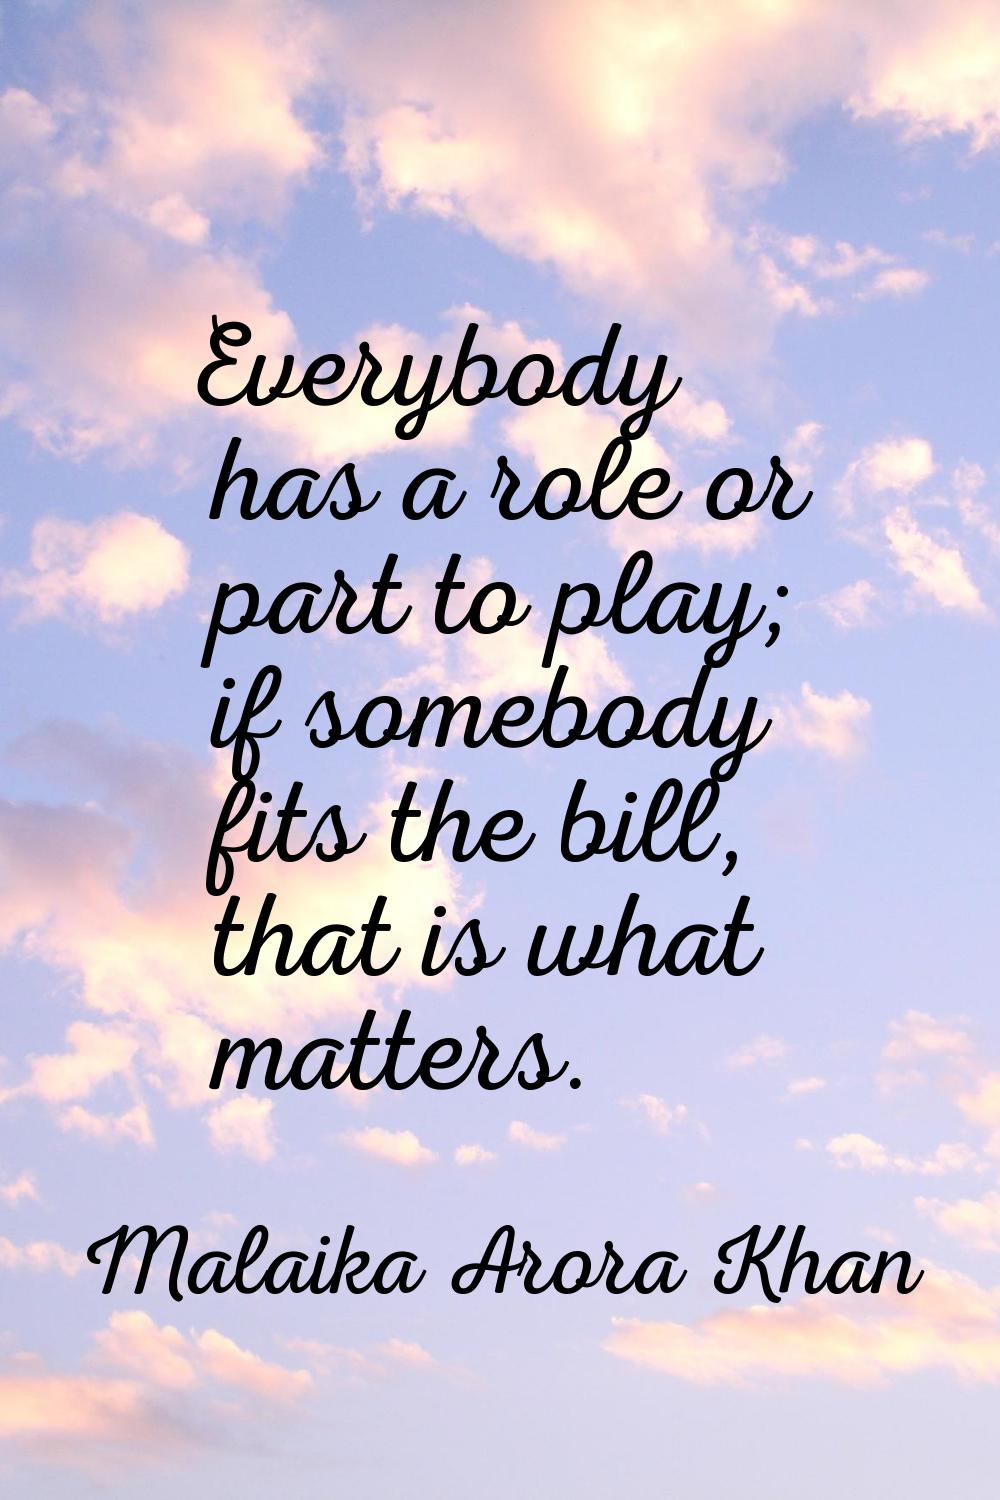 Everybody has a role or part to play; if somebody fits the bill, that is what matters.